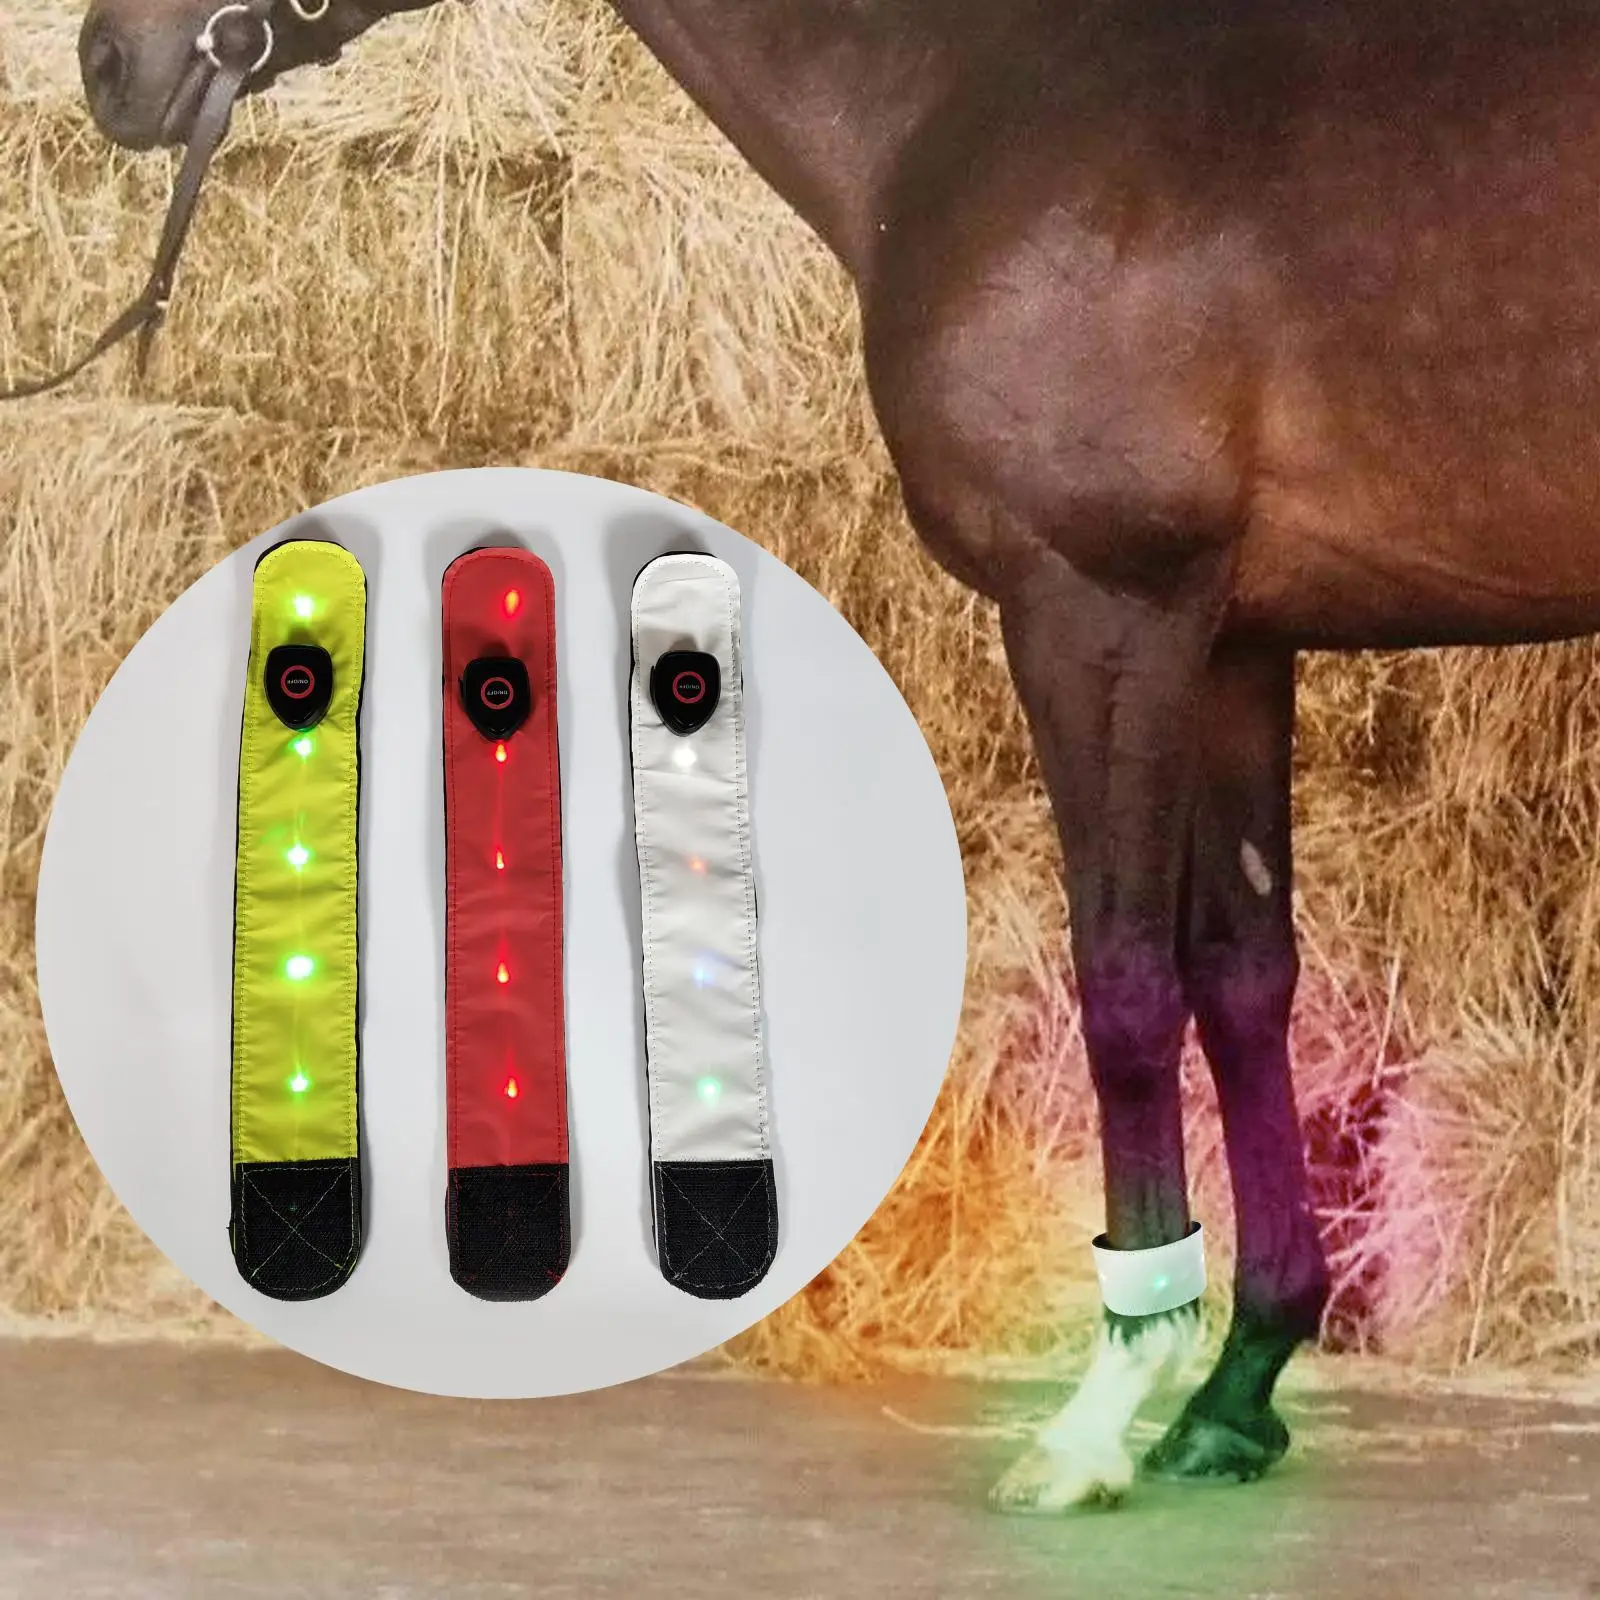 Neoprene Reflective Horse LED Ankle Strap Protection Safety Belt Bands Legging Equestrian Supply for Night Riding Running